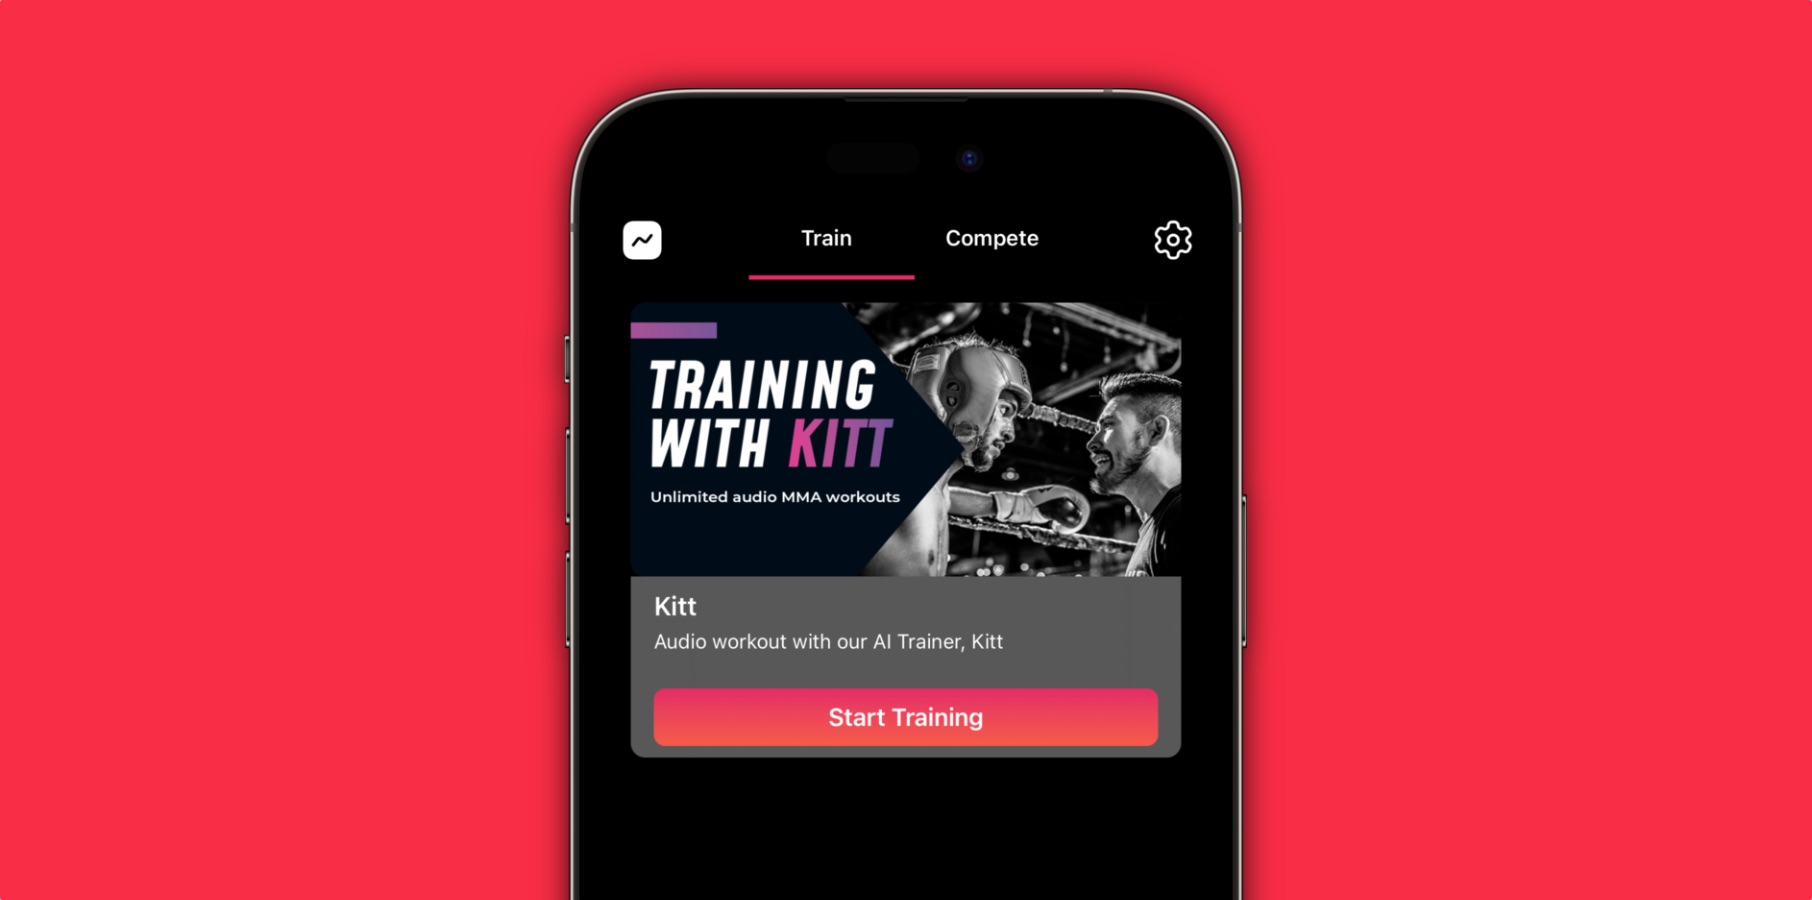 Kayyo is a free AI-powered personal MMA trainer available for iPhone users